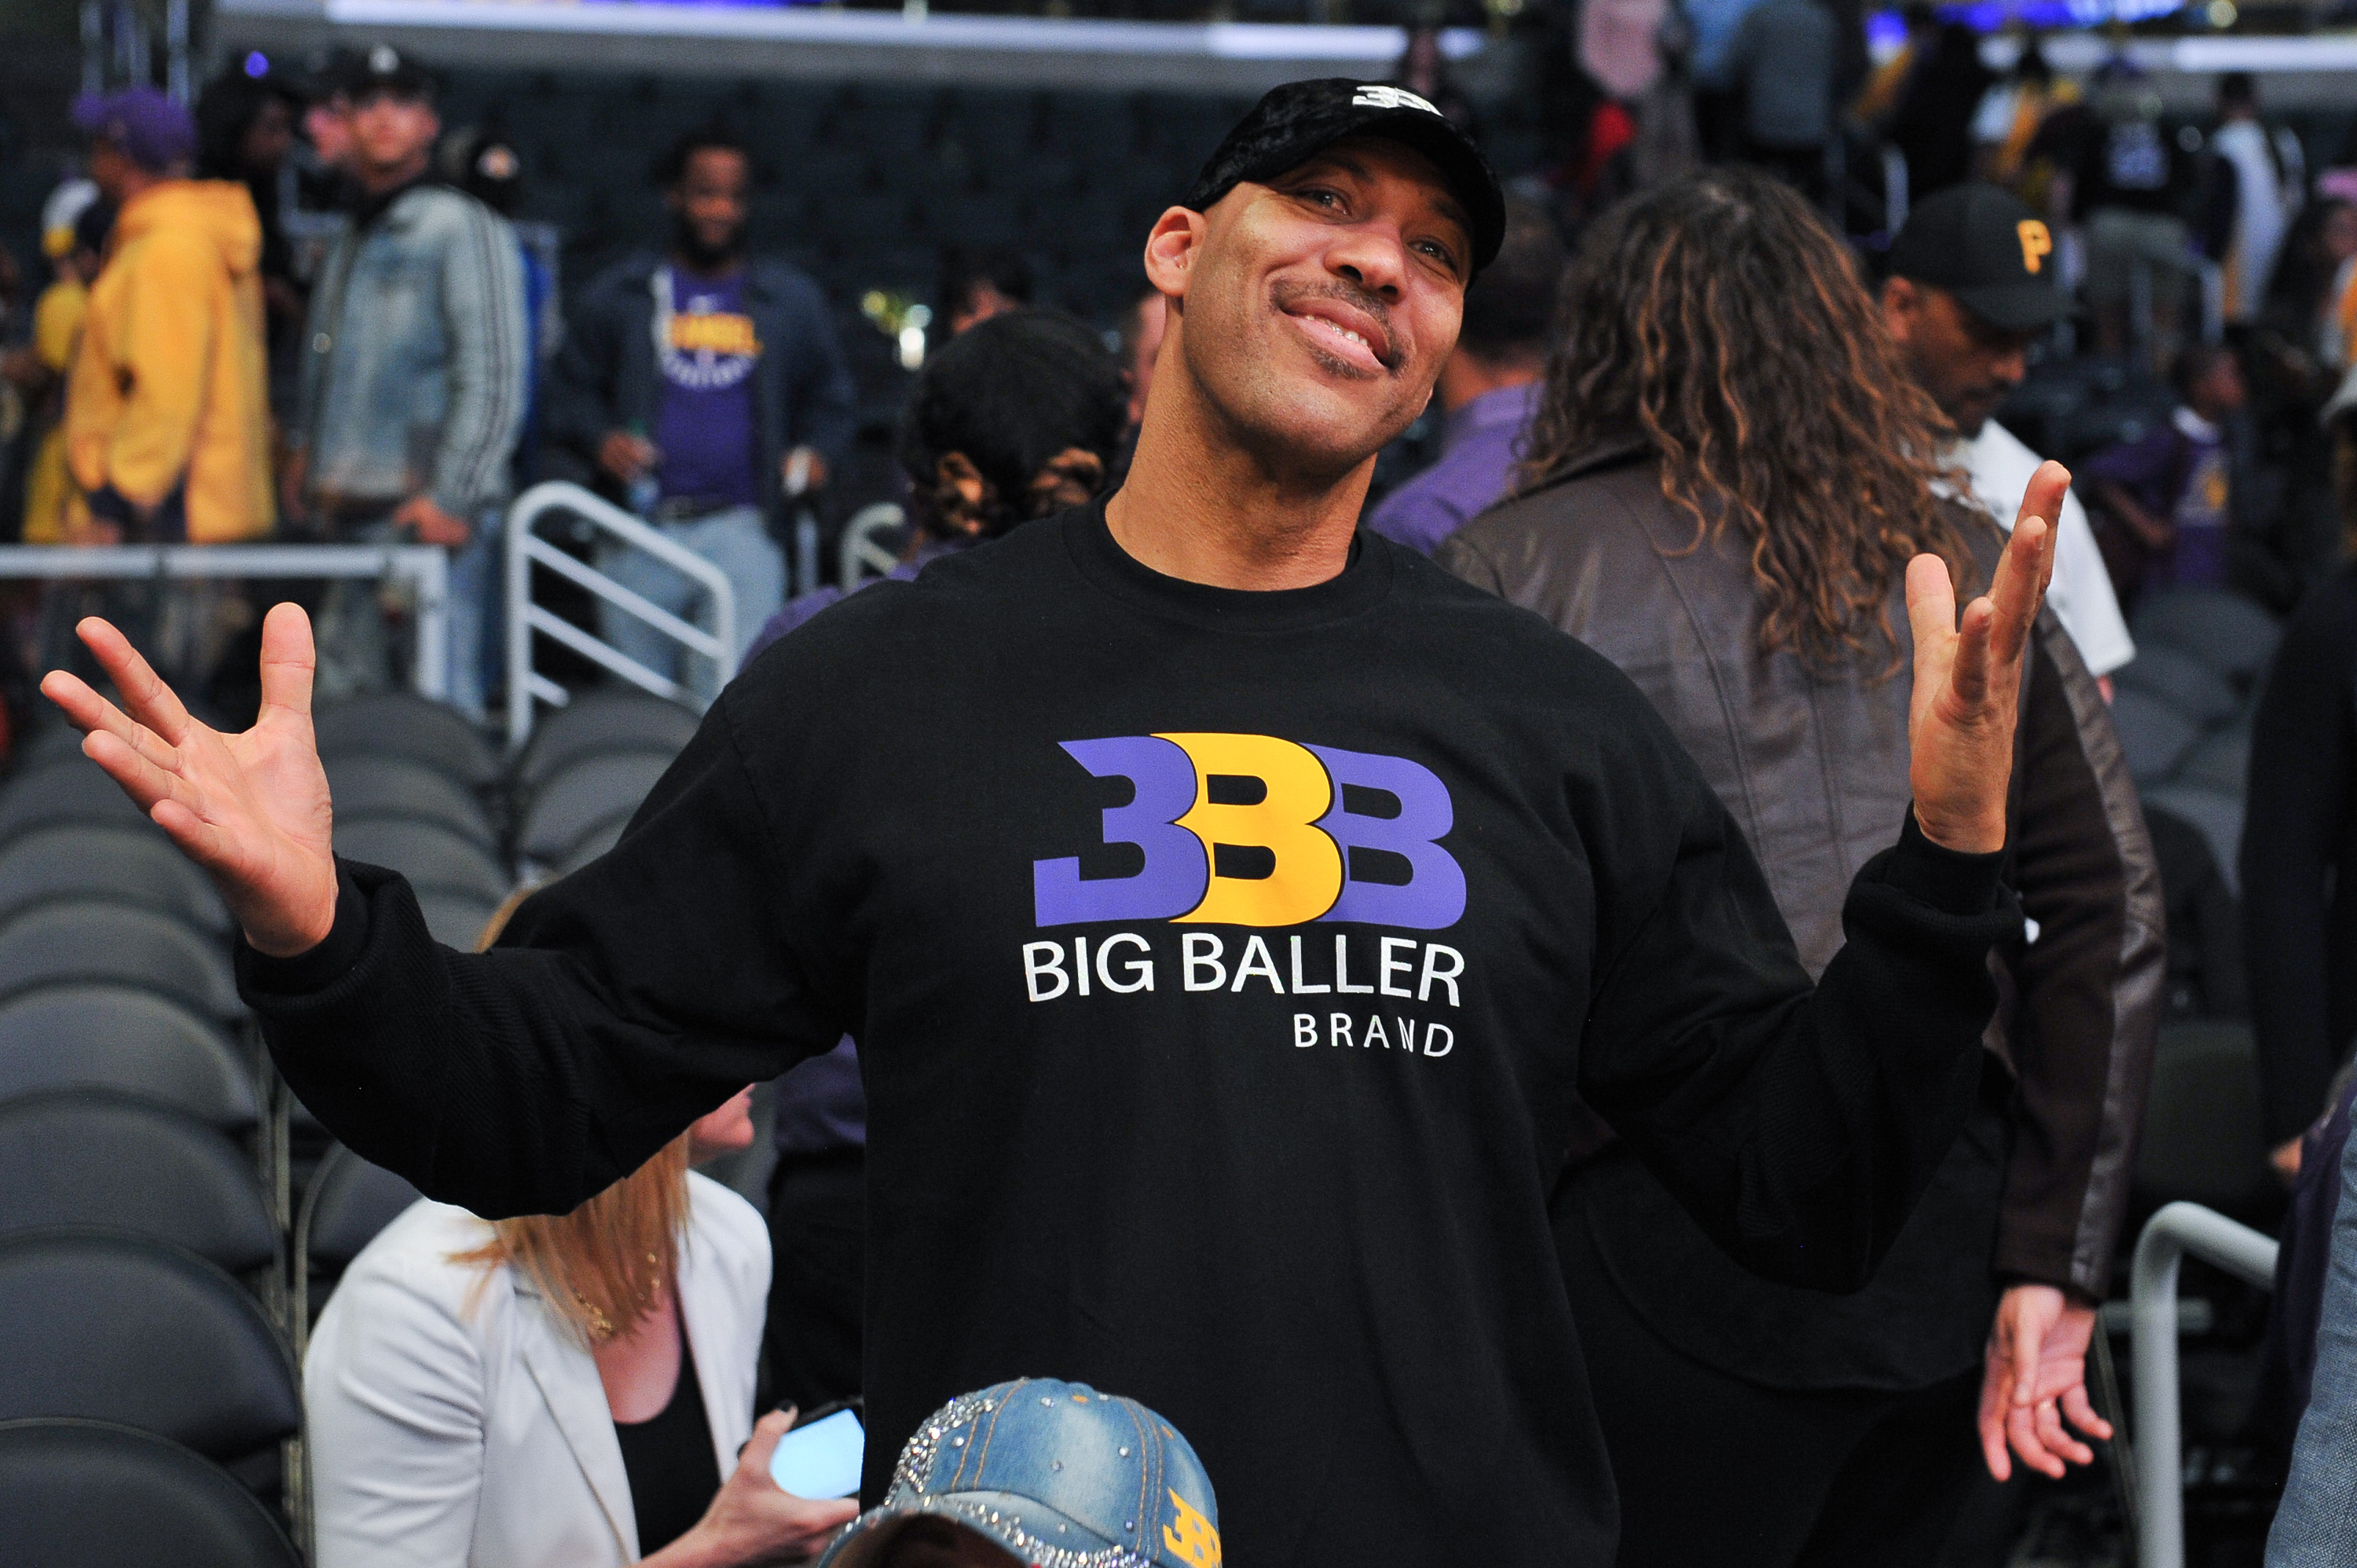 Did LaVar Ball ever play in the NBA?